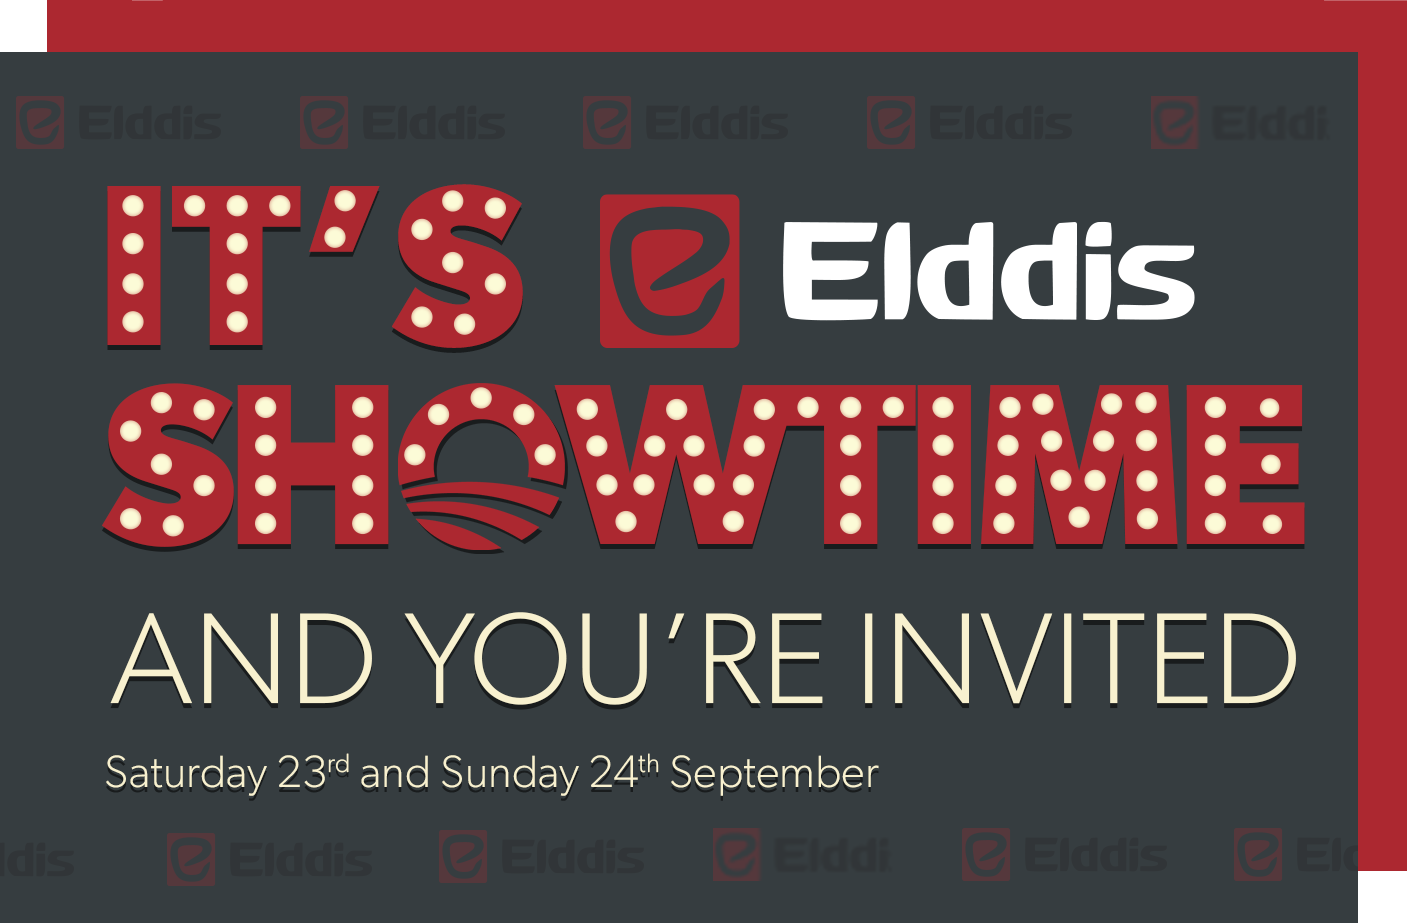 It's Elddis Showtime And You're Invited!!